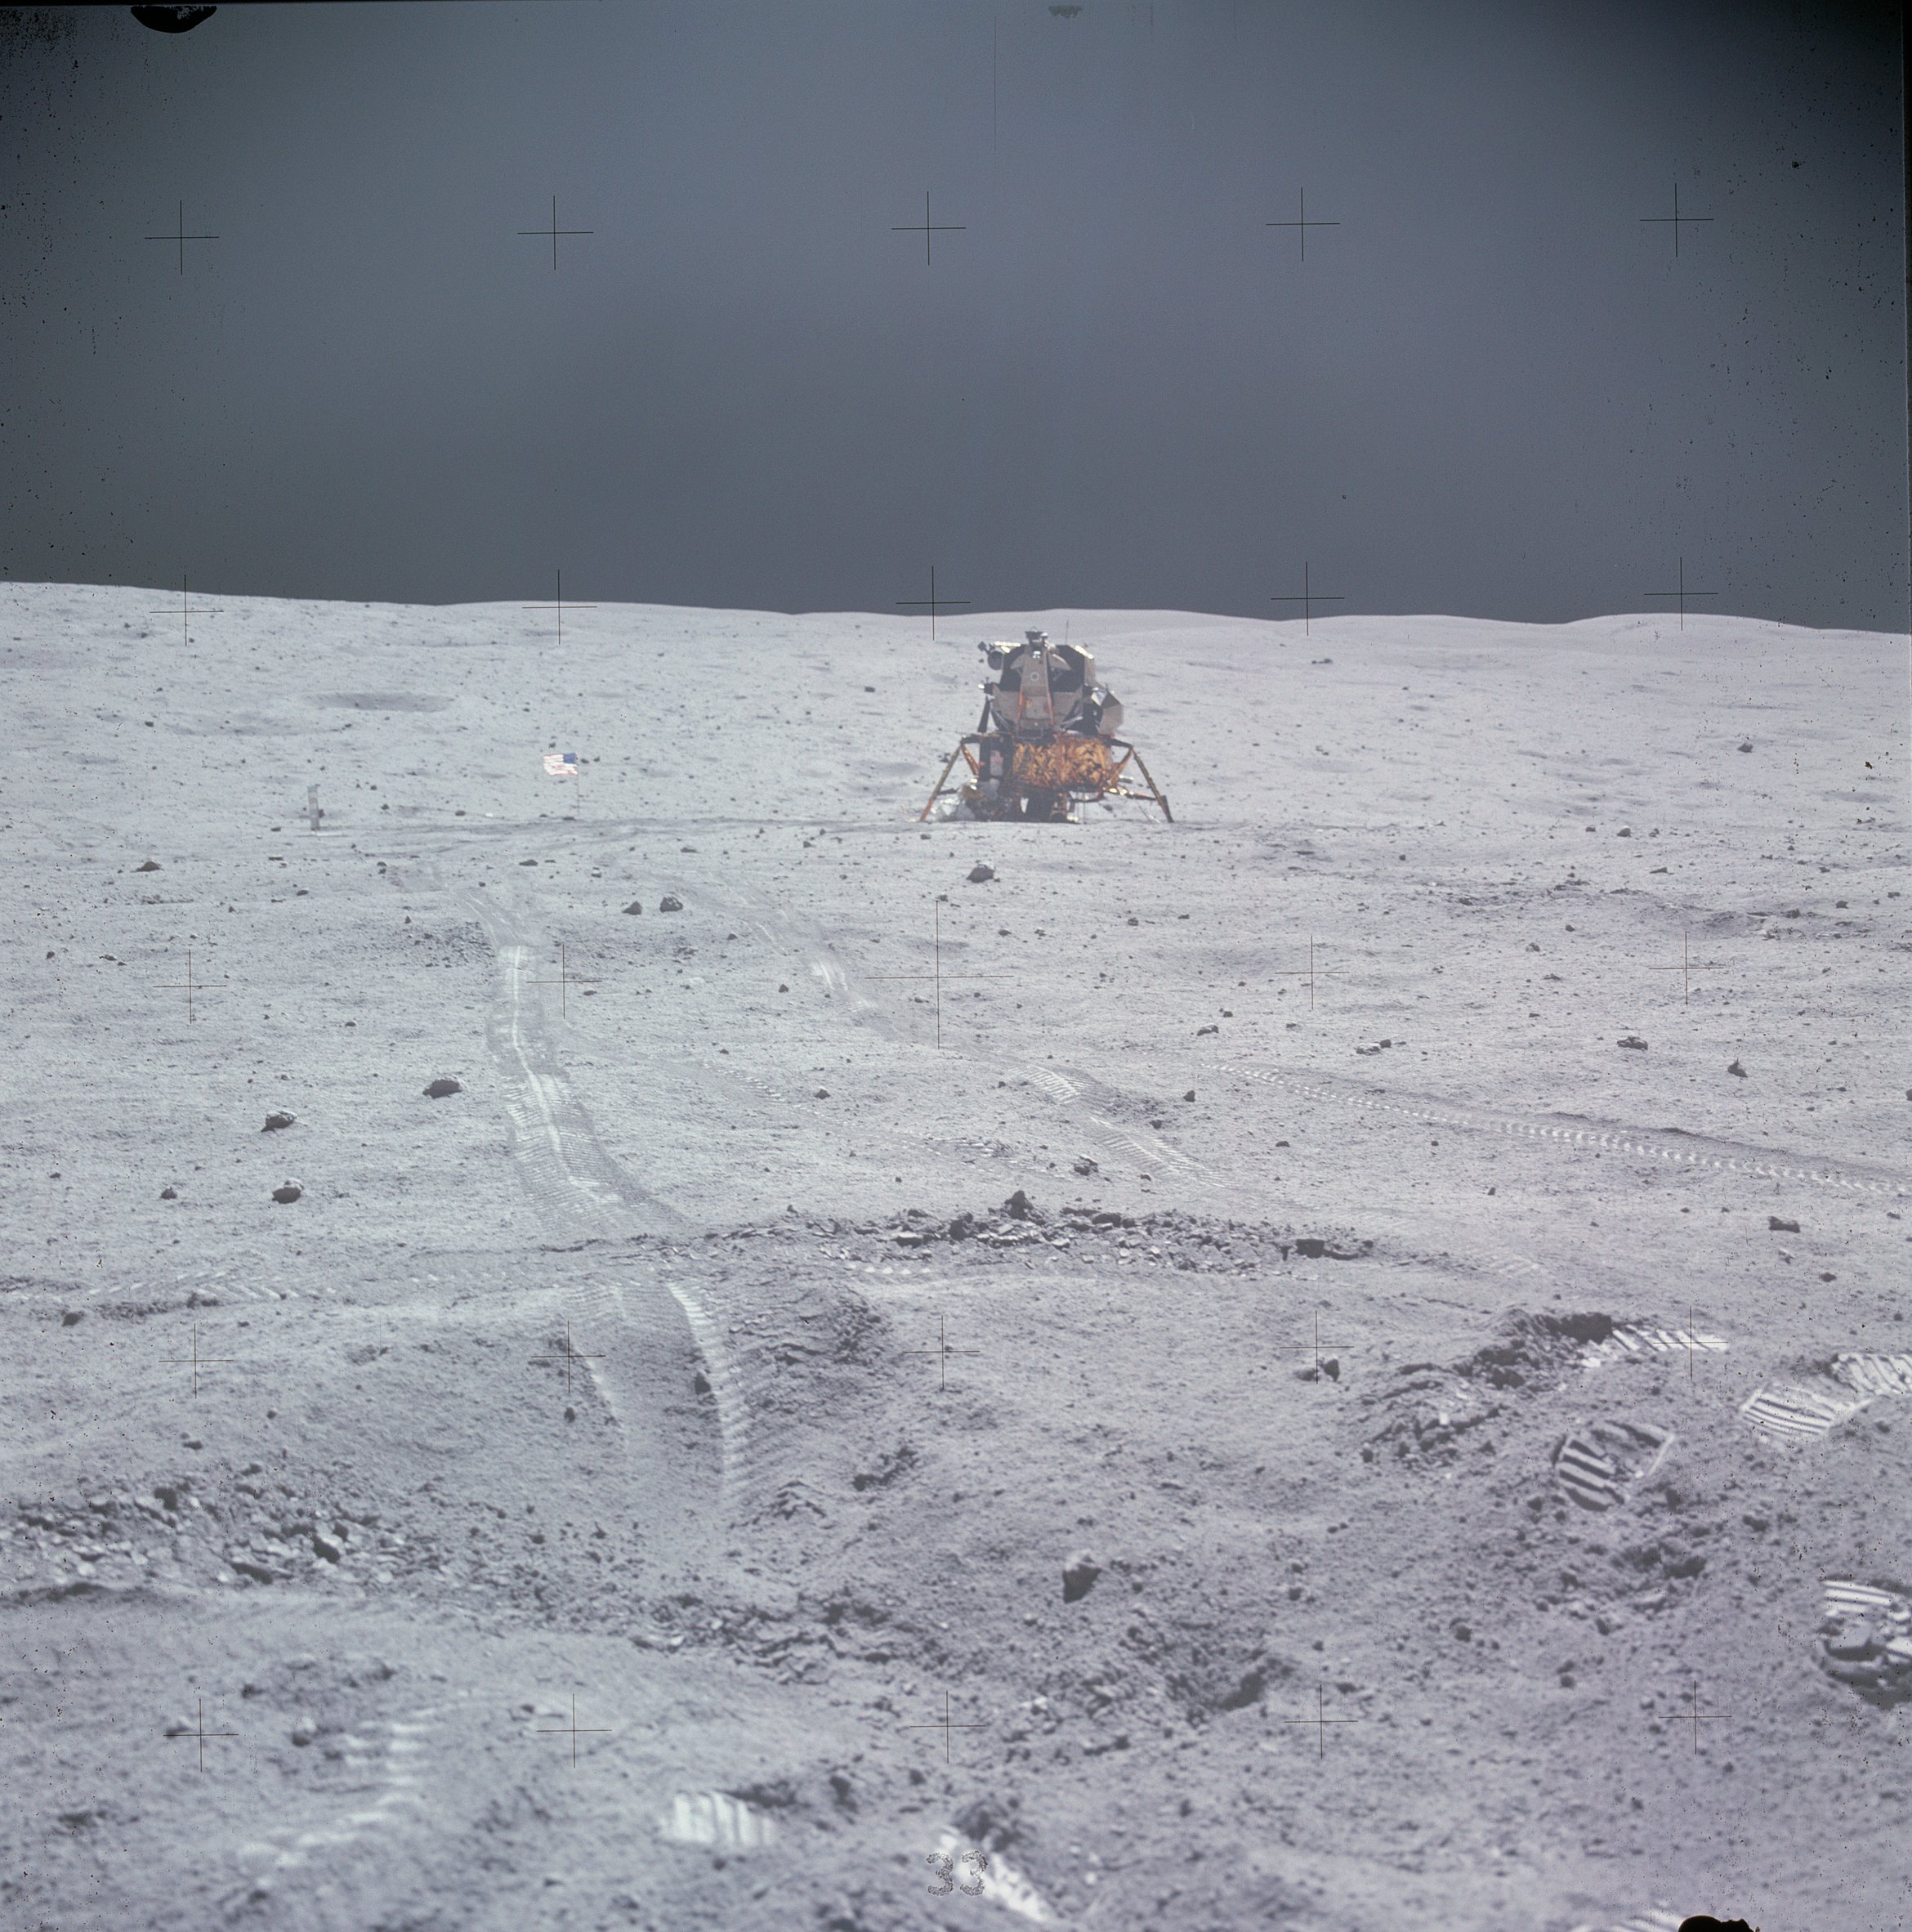 spacecraft in the distance on the gray, sunlit lunar surface